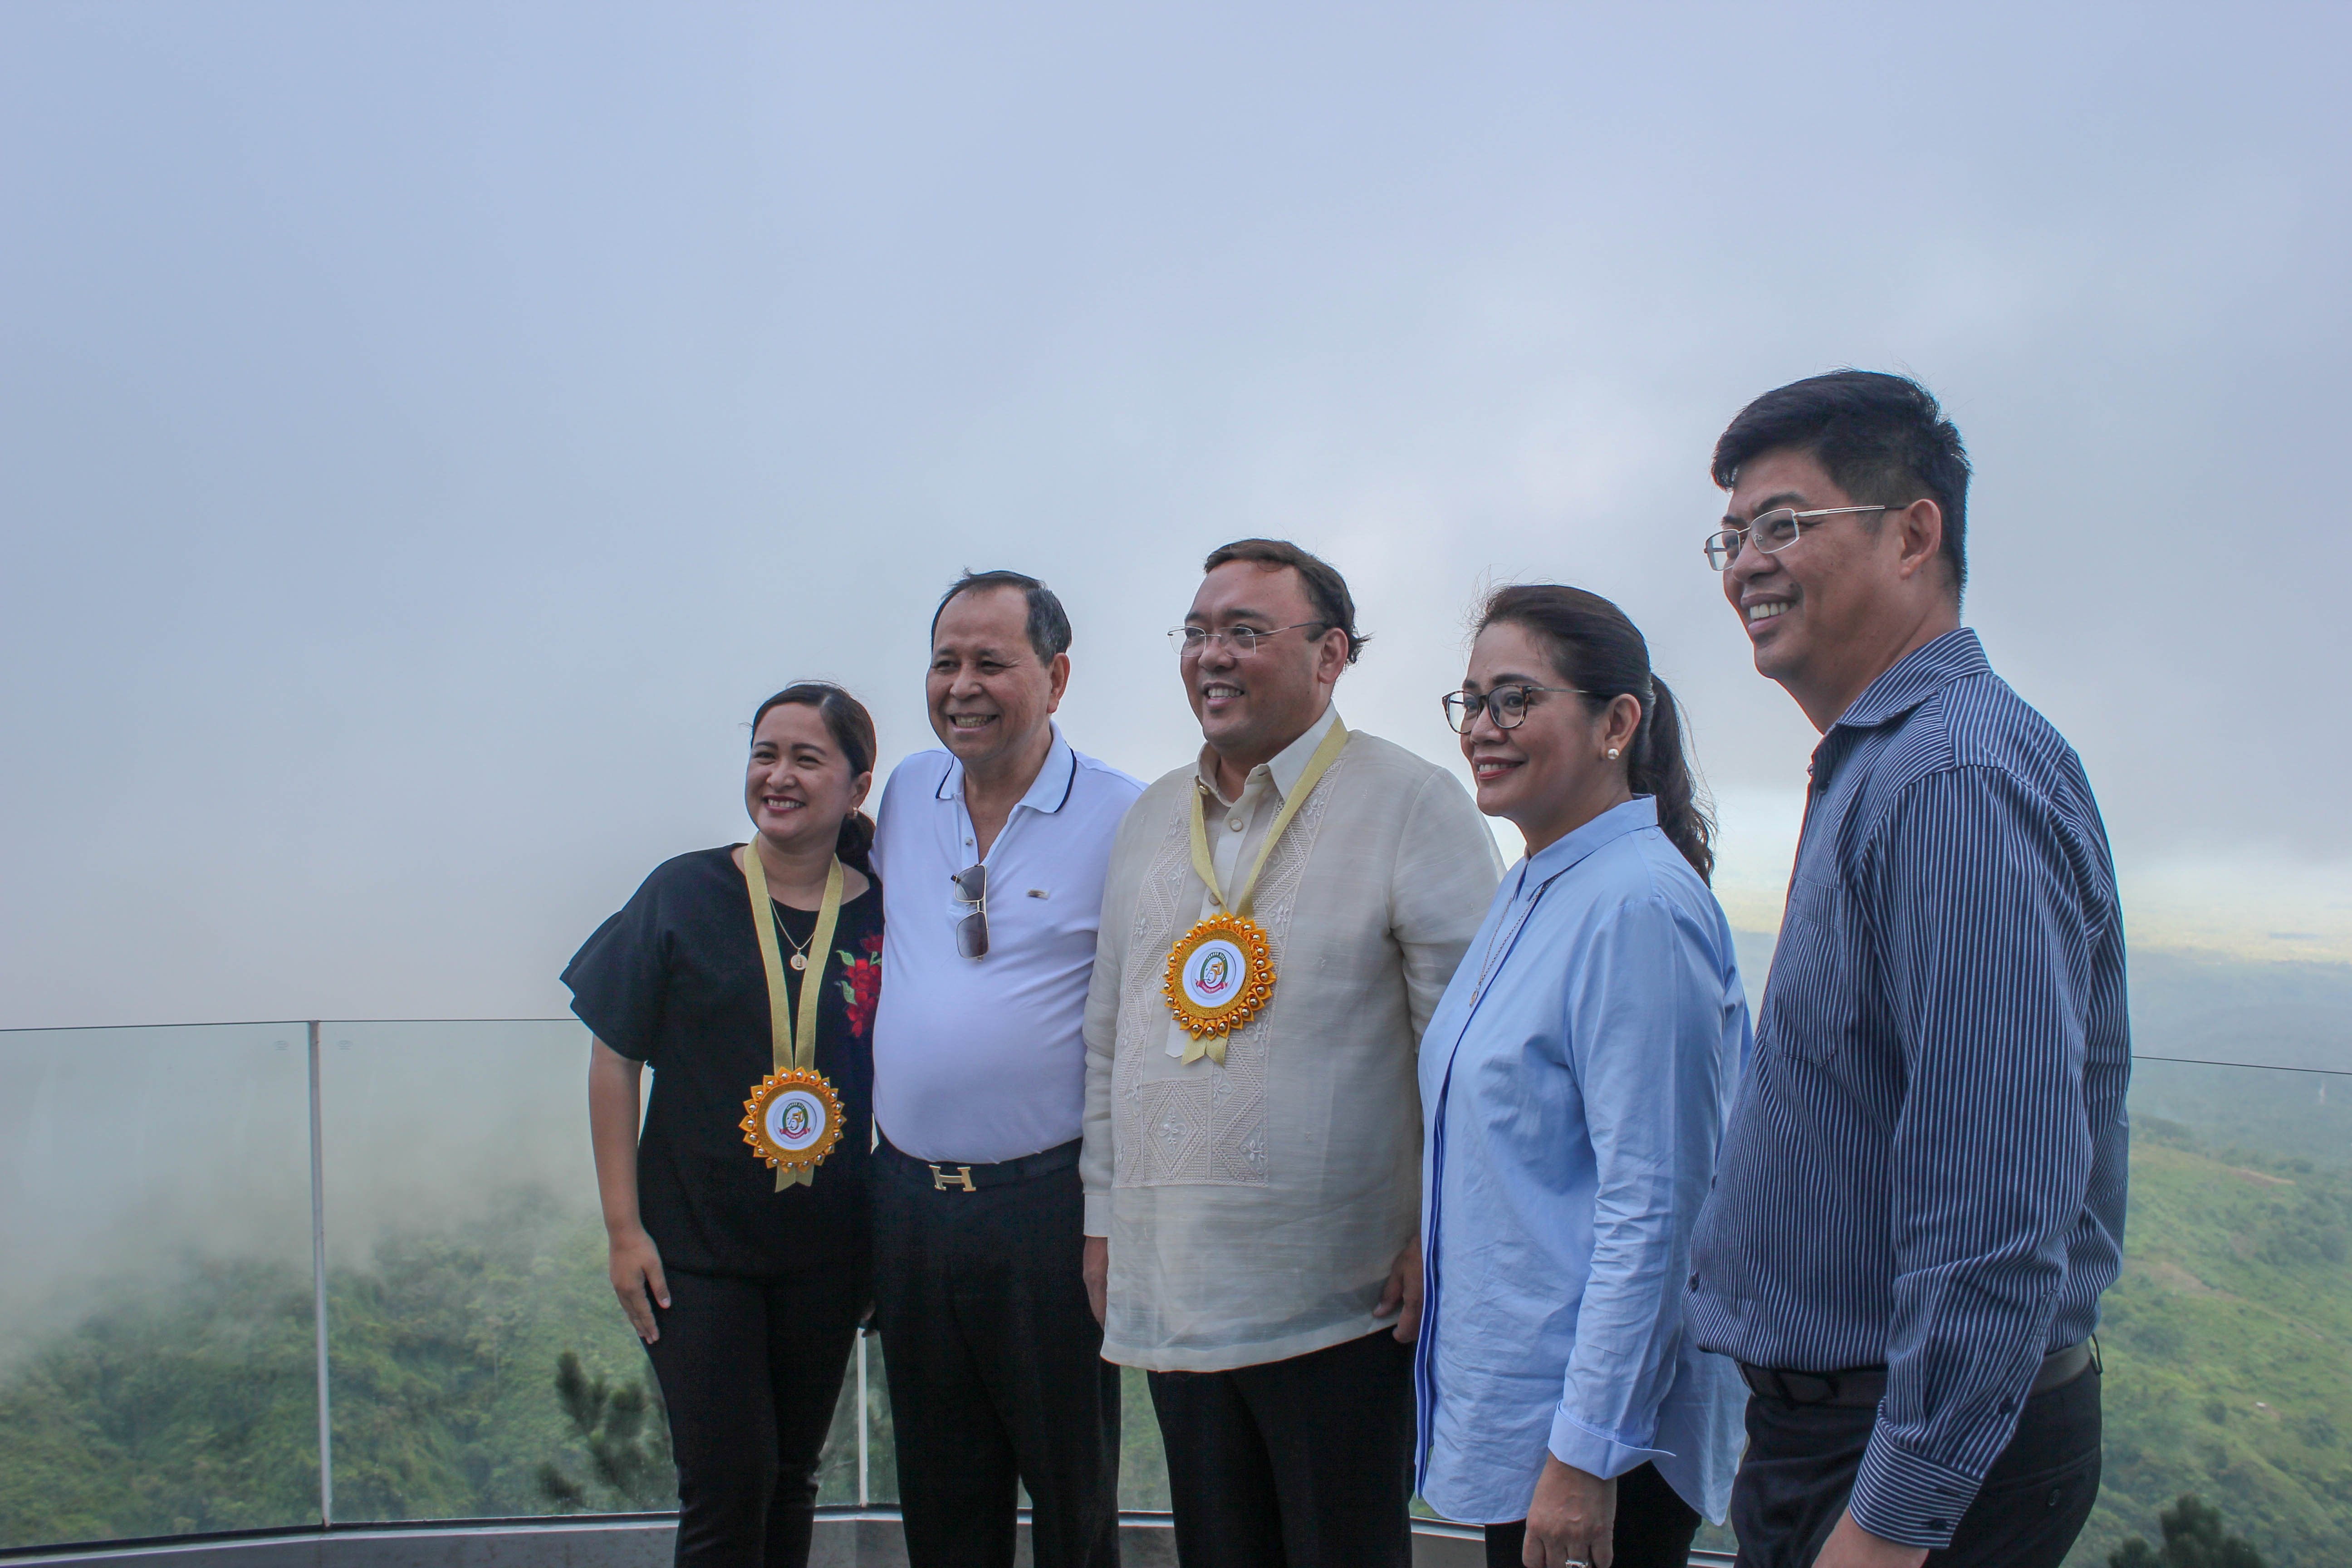 From left to right: May Salvana- Unchuan, Department of Tourism Region 10 Regional Director; Hon. Henry Oaminal, District Representative Misamis Occidental 2nd District; Hon. Harry Roque, Jr., Appointed Presidential Spokesperson; Dr. Jenifer Tan and Mayor Philip Tan, Tangub City.